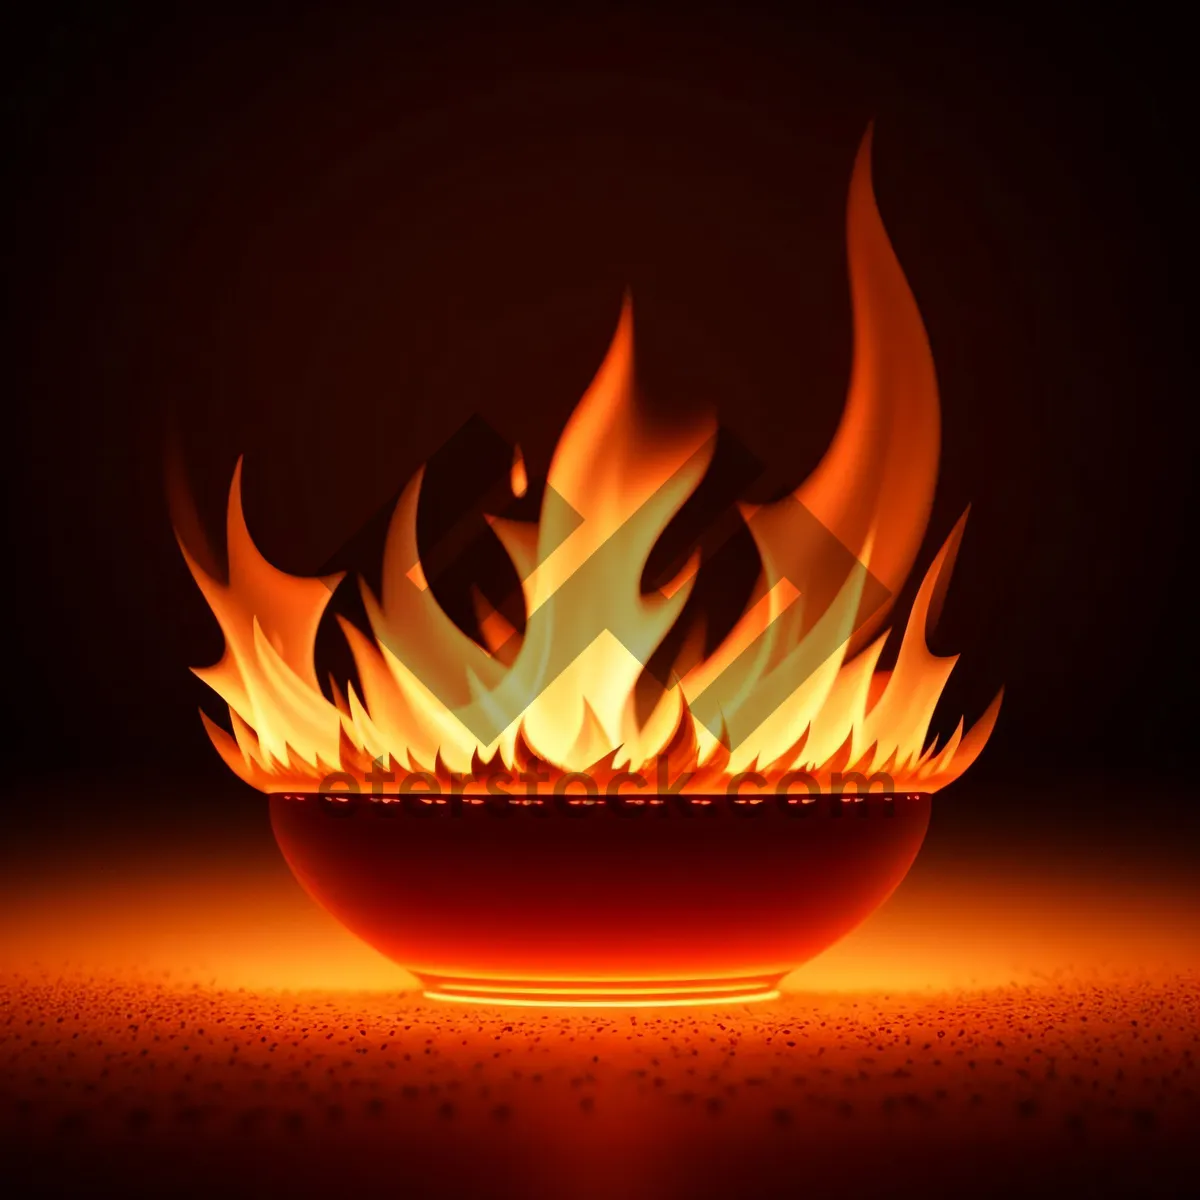 Picture of Fiery Blaze: Burning Ember of Heat and Flame